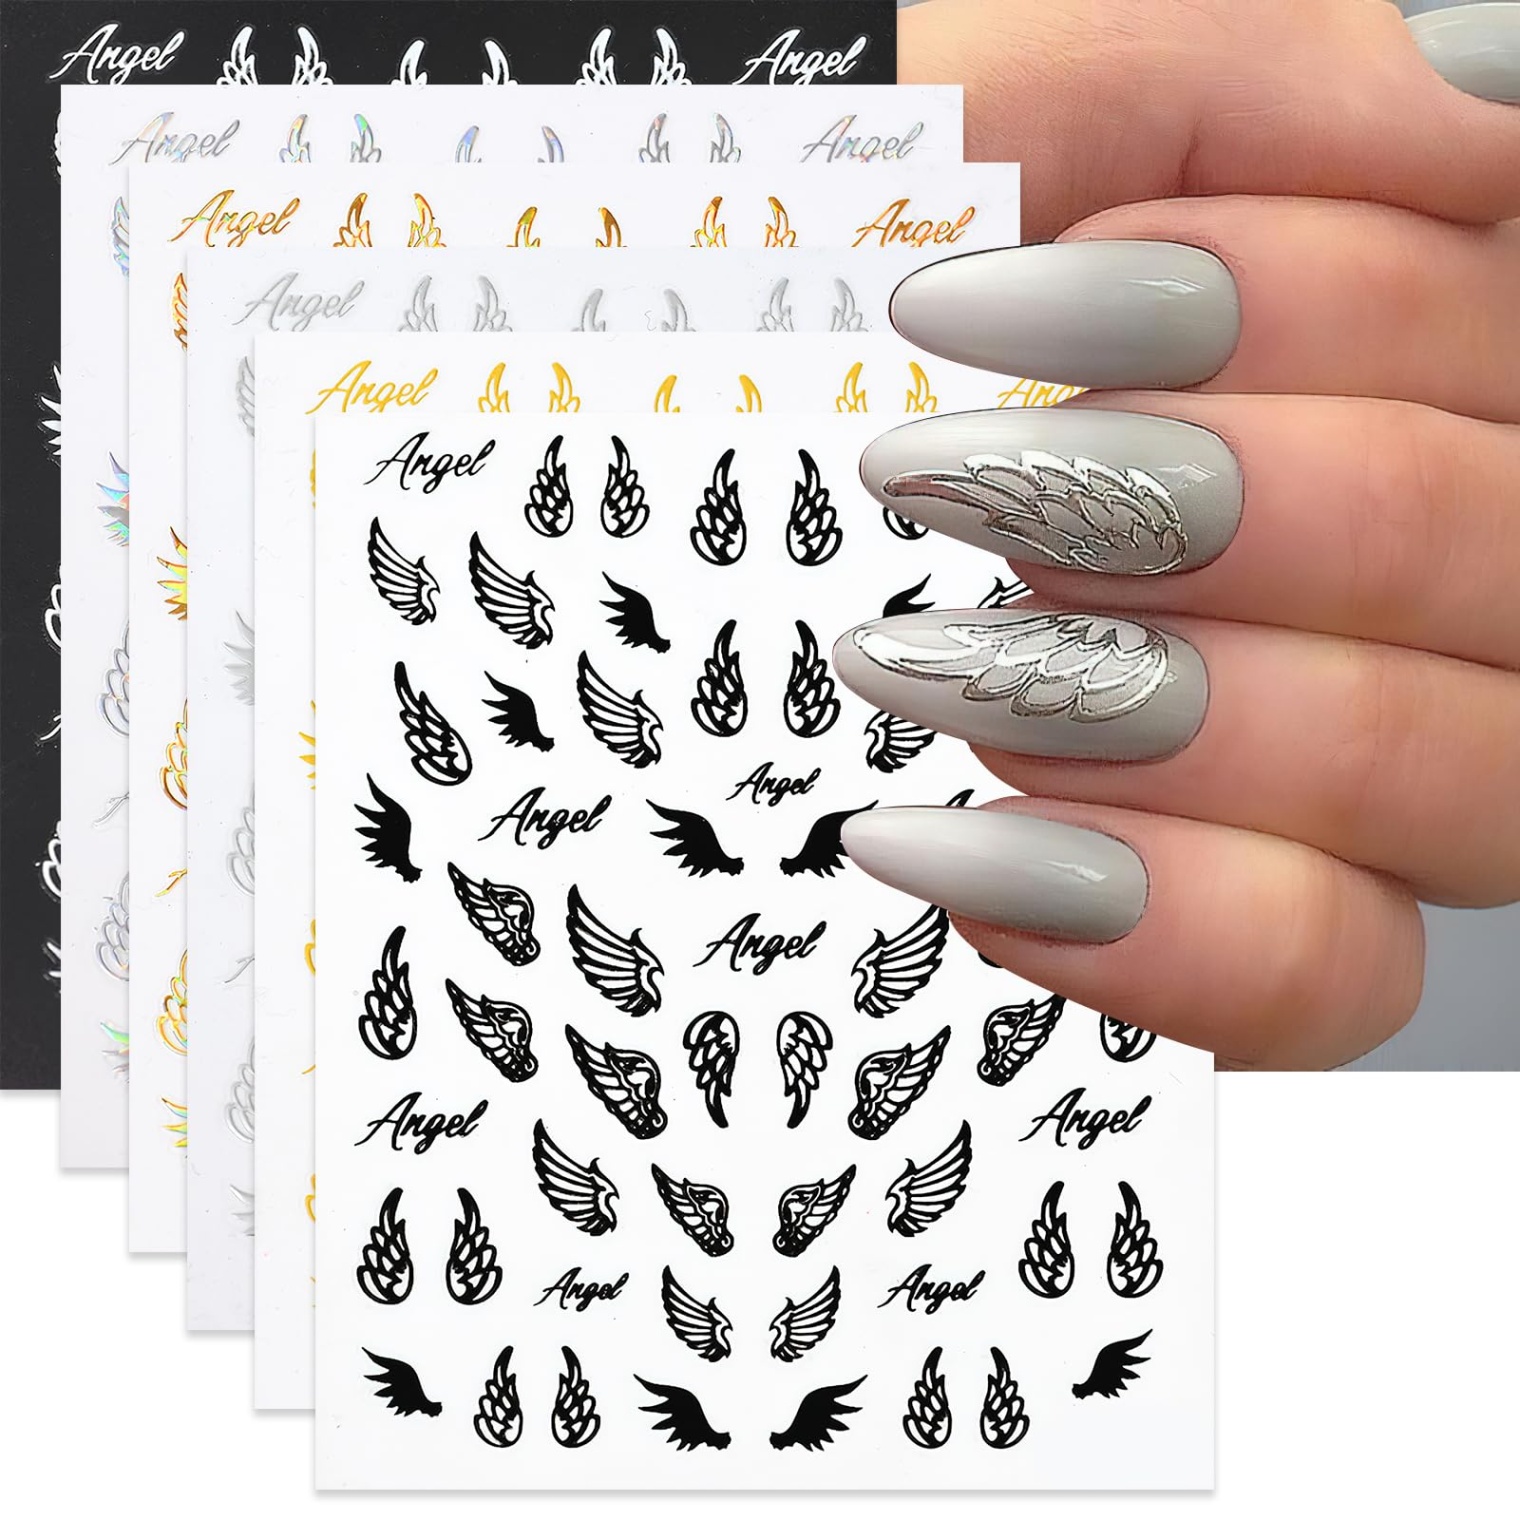 angel wings nail design Bulan 5 Angel Wings Nail Stickers Laser Metallic Angel Wings Nail Decals D  Self-Adhesive Holographic Gold Silver Wings Letter Decals Stickers Design  Nail Art